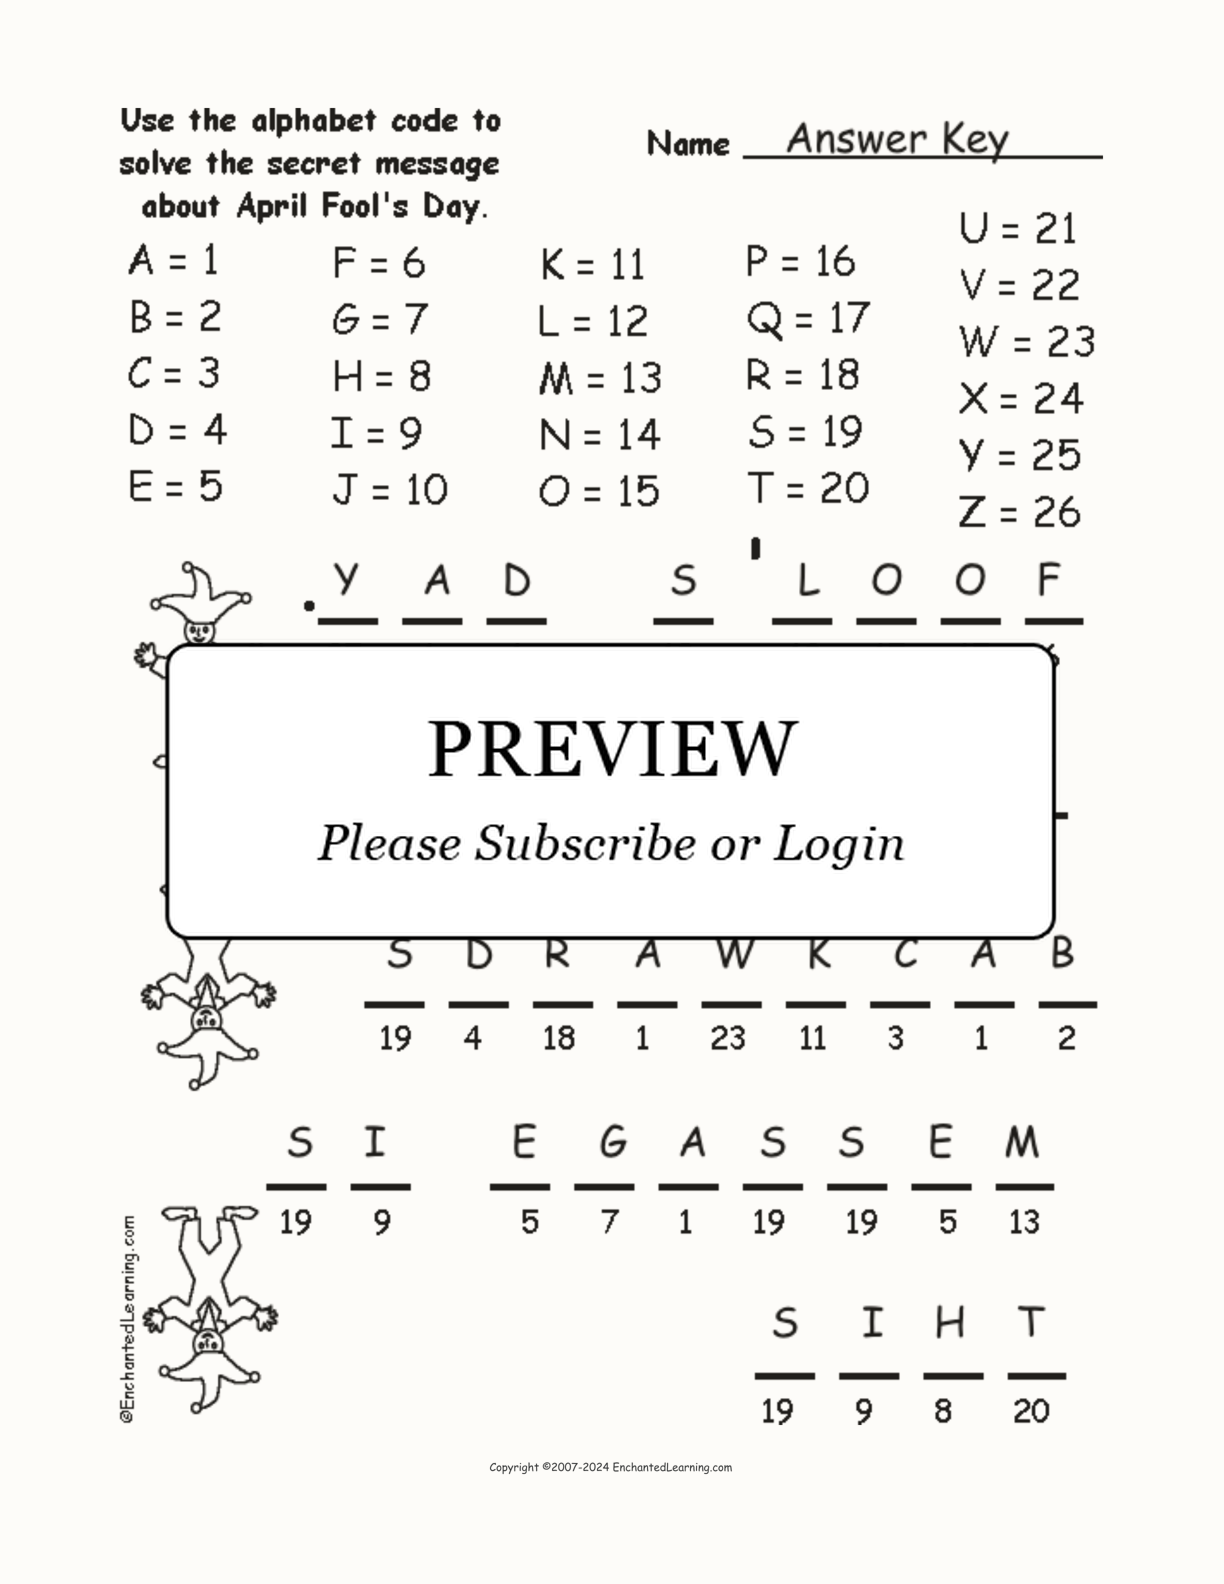 April Fool's Day Alphabet Code interactive worksheet page 2